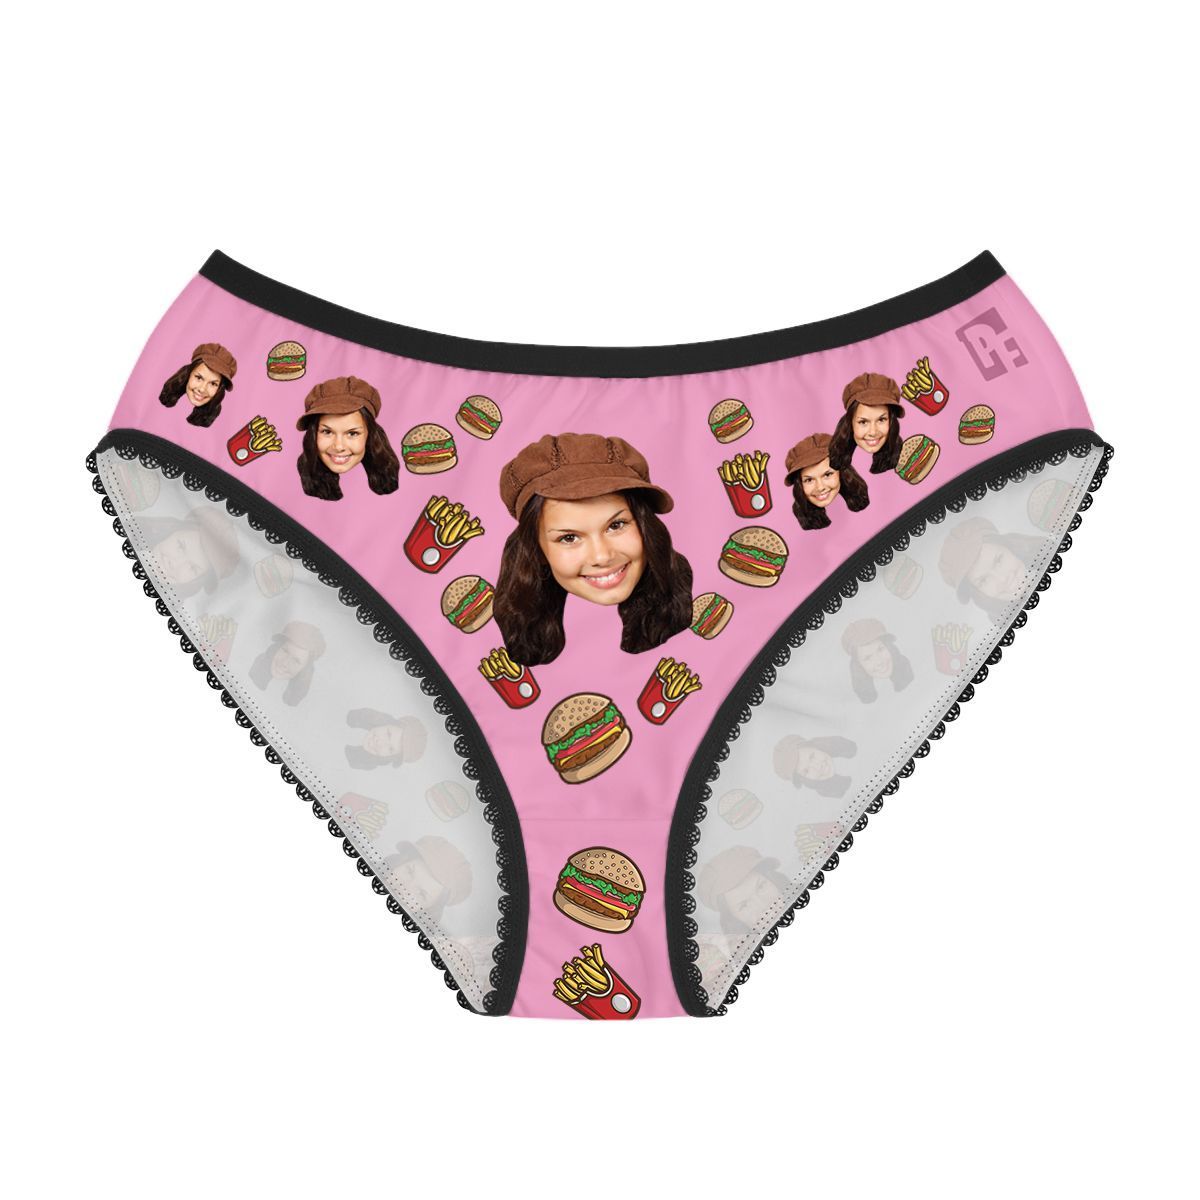 Pink Fastfood women's underwear briefs personalized with photo printed on them